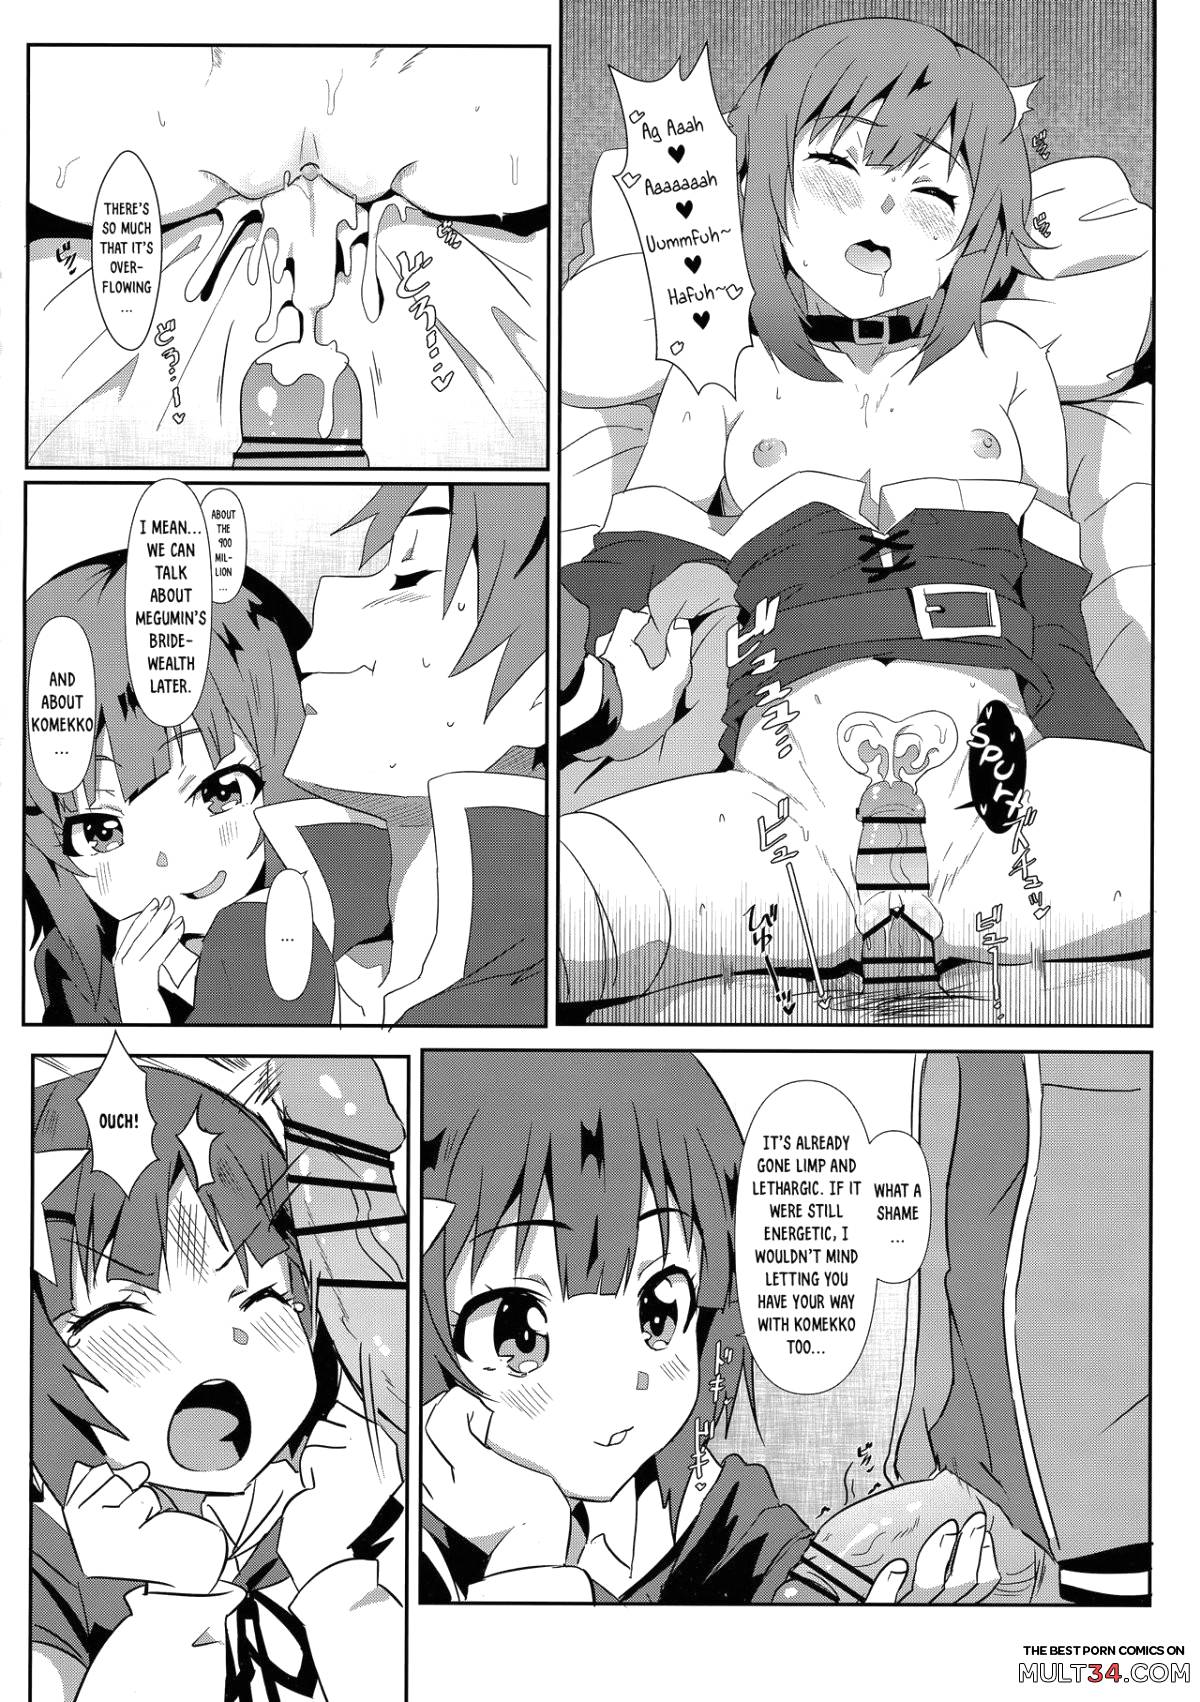 Blessing Megumin with a Magnificence Explosion! 6 page 14